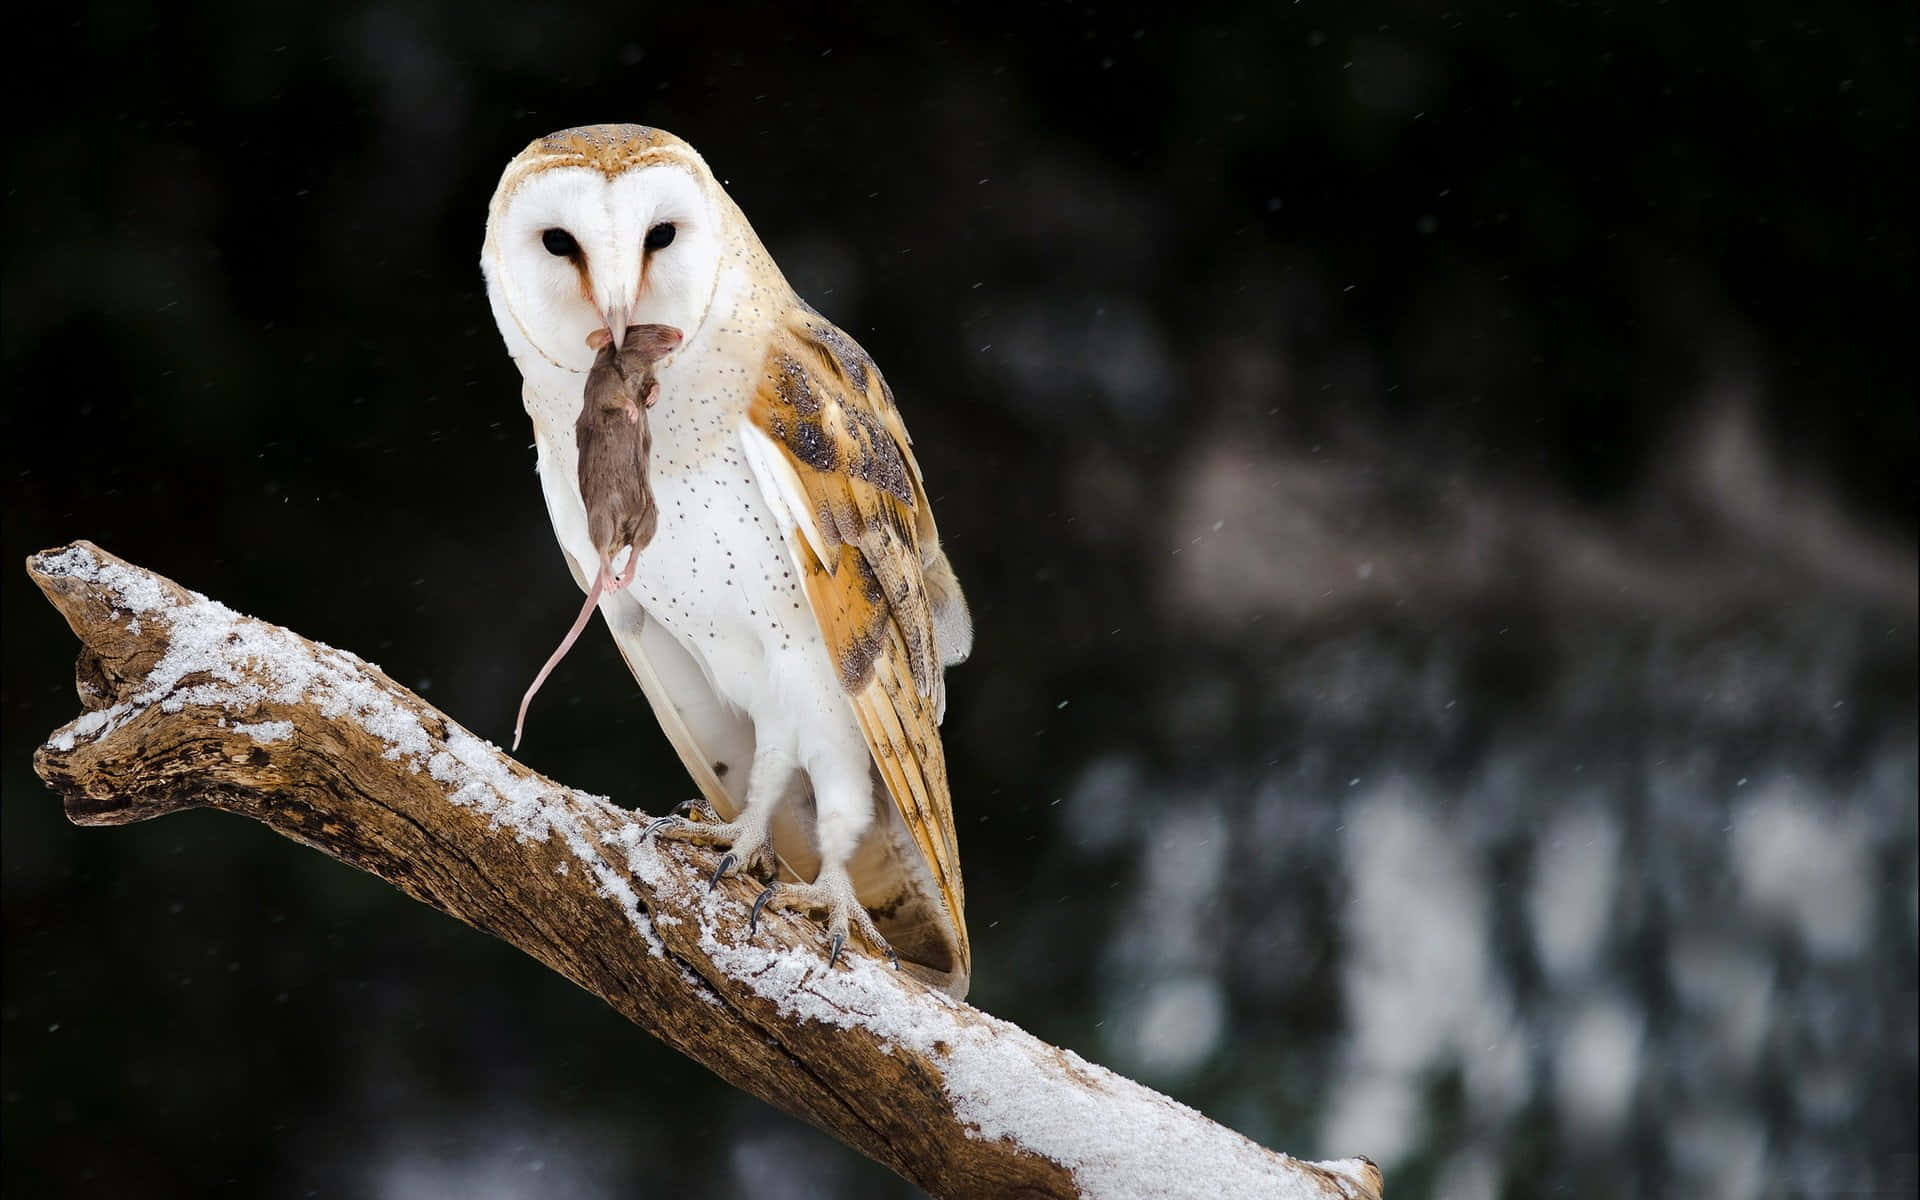 An adorable barn owl perched on a tree branch